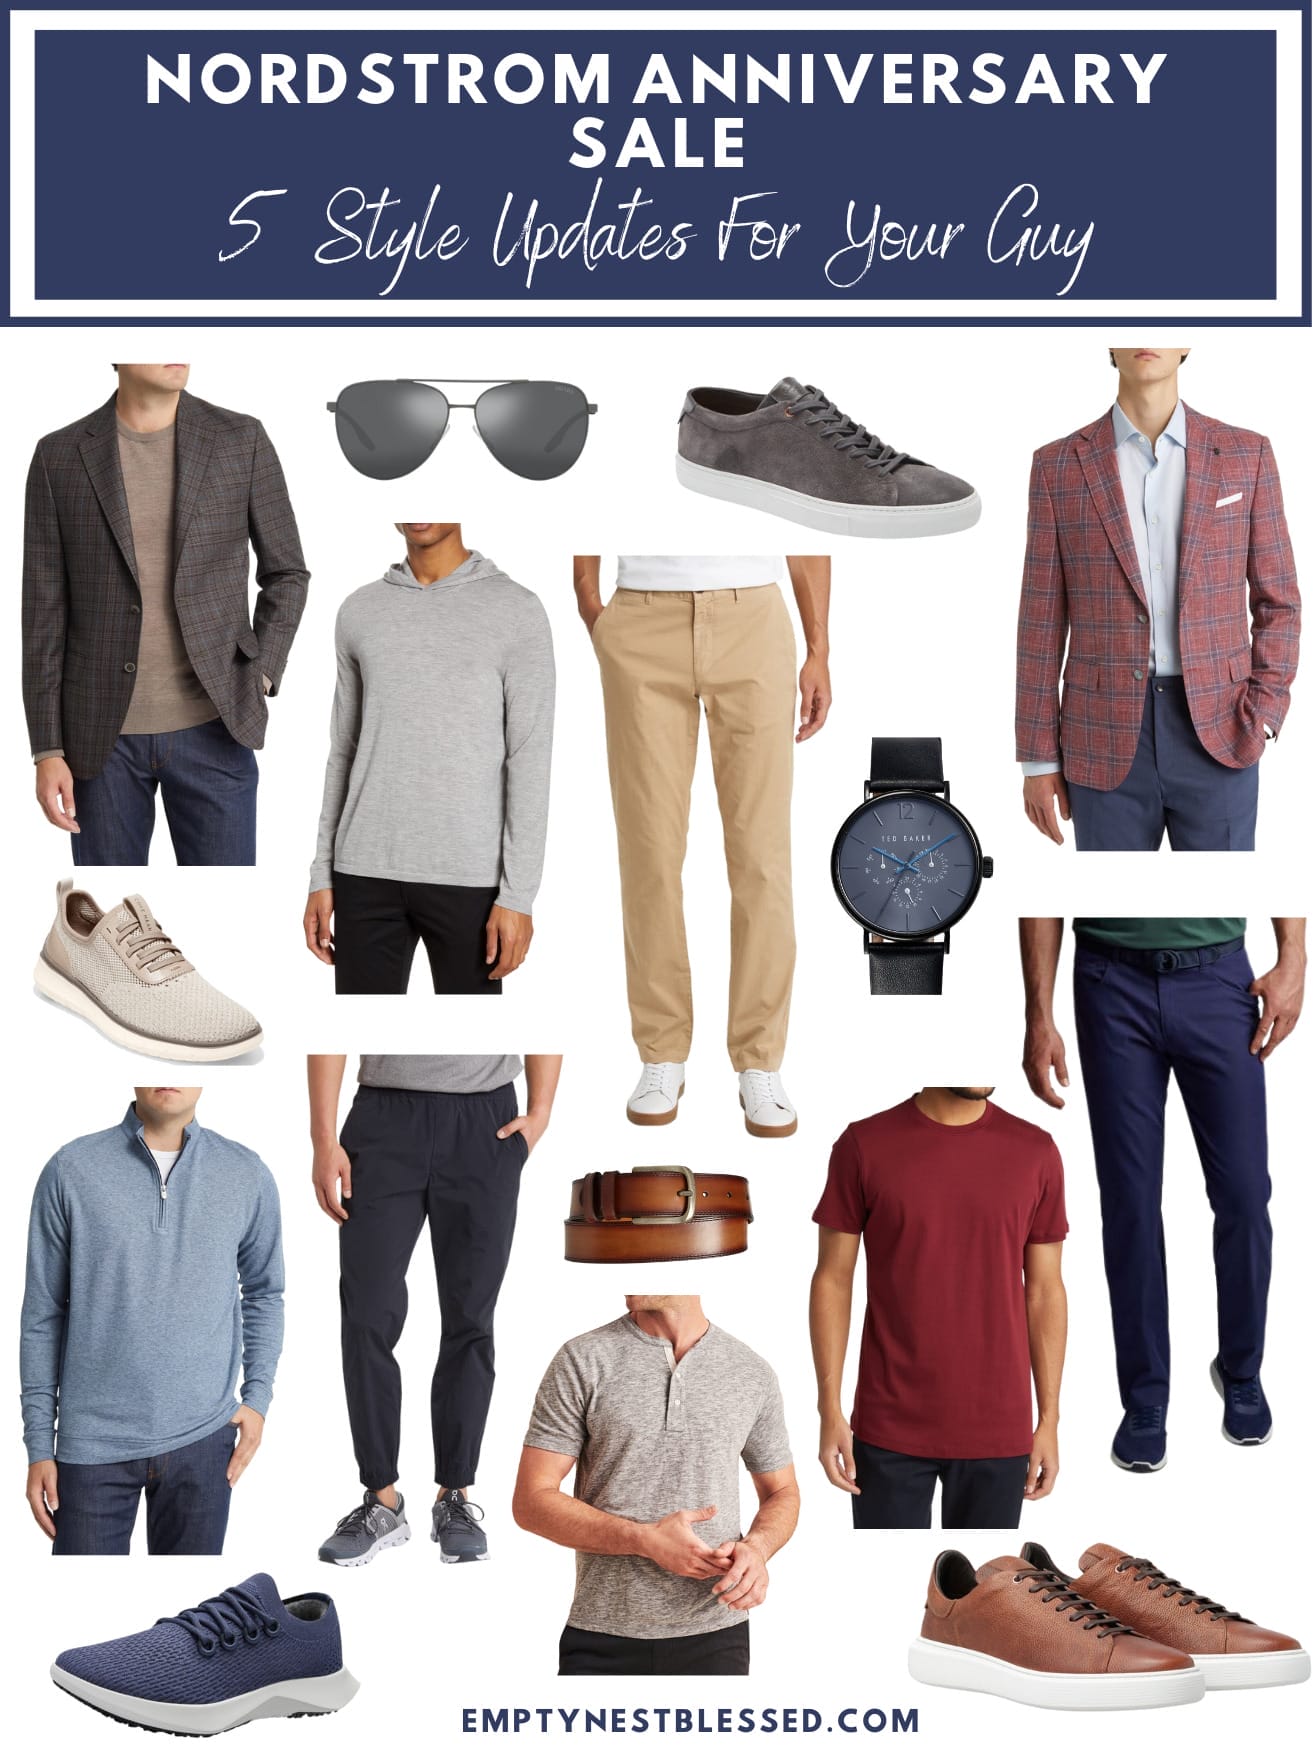 CLEARANCE MENS ACCESSORIES - Up to 80% OFF Last Chance Styles